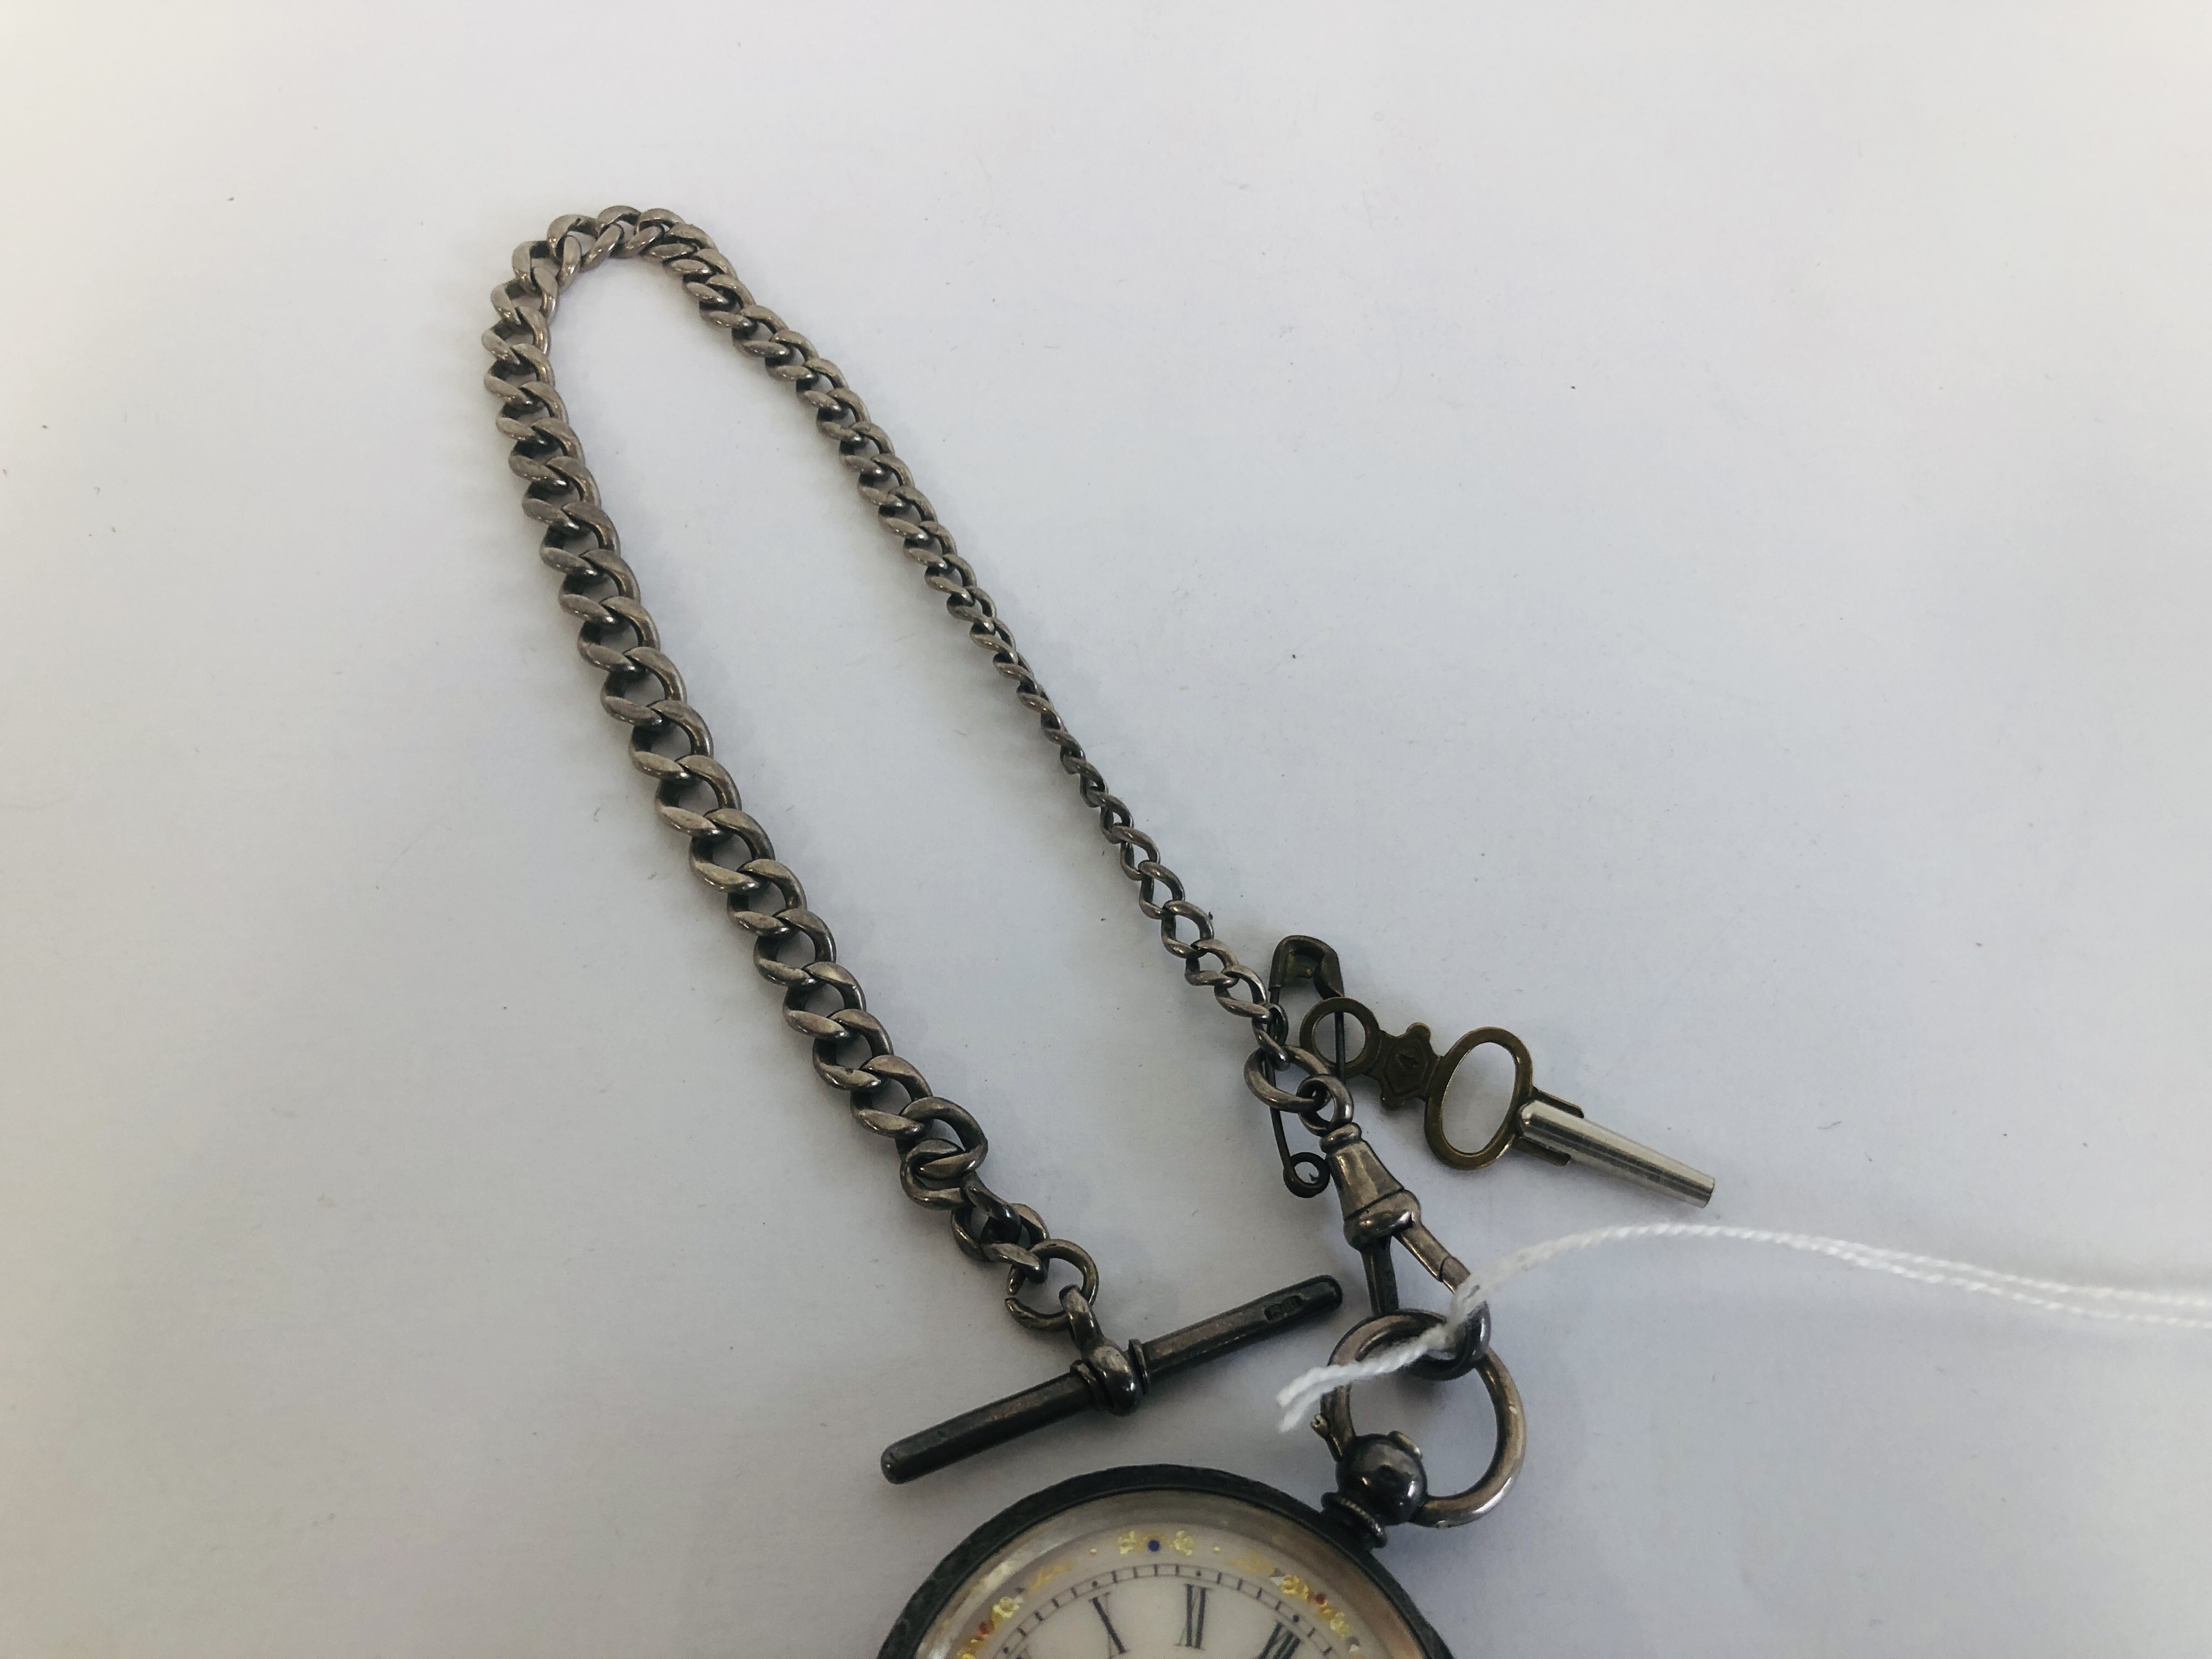 AN ORNATE SILVER POCKET WATCH WITH DECORATIVE ENAMELLED FACE ON SILVER T-BAR CHAIN - Image 4 of 6